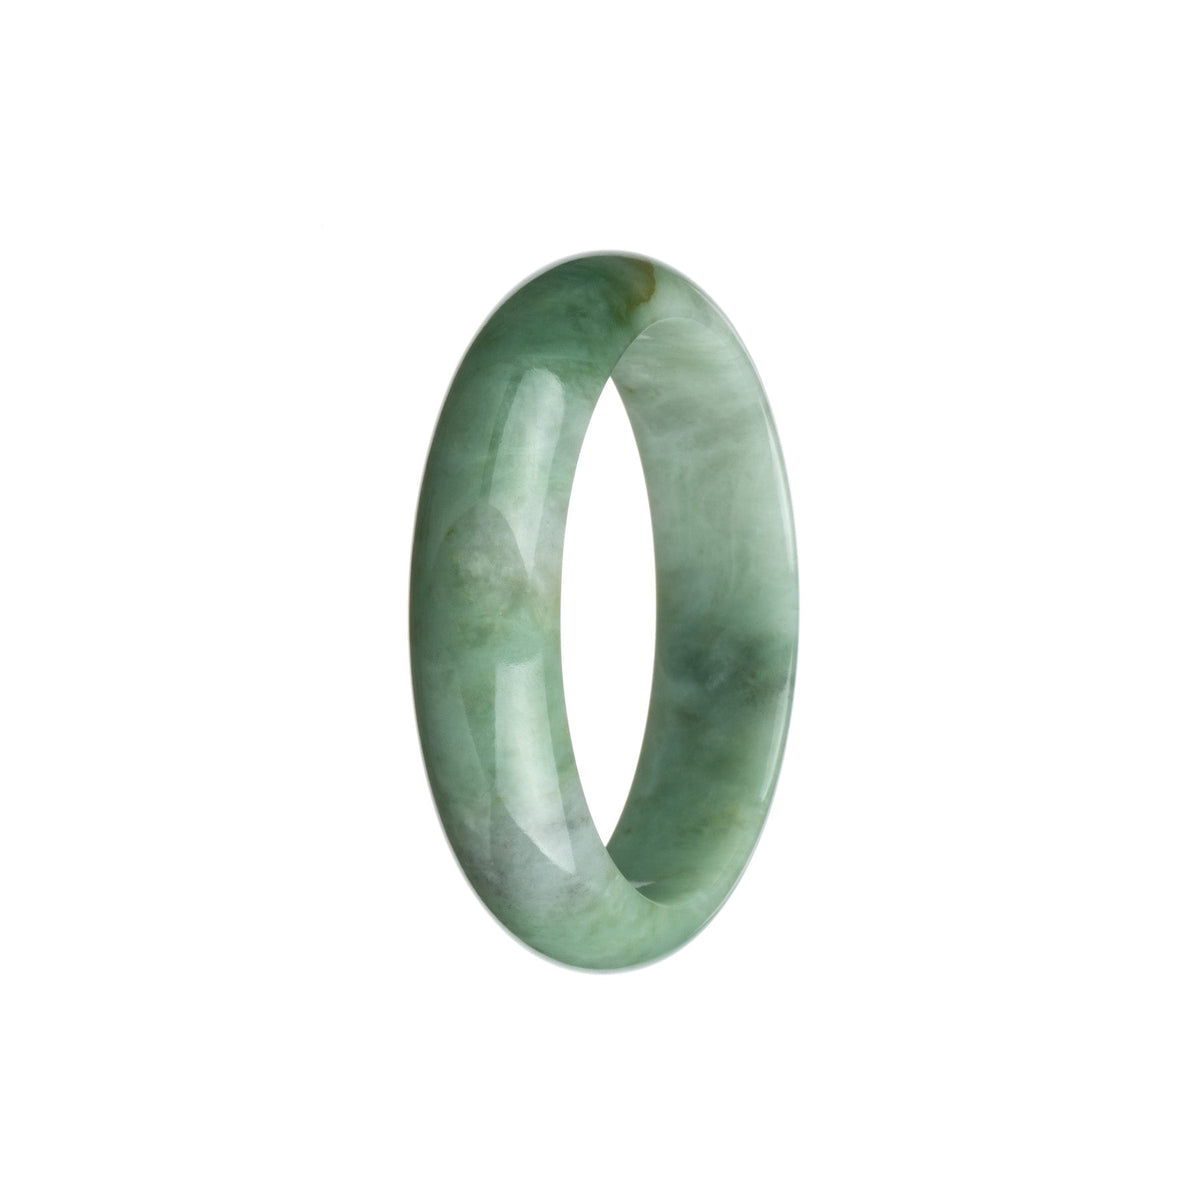 A close-up image of a beautiful green and white jade bangle with a unique half moon pattern. The bangle is made of genuine natural jadeite jade and measures 54mm in diameter. It is a stunning piece of jewelry from the brand MAYS.